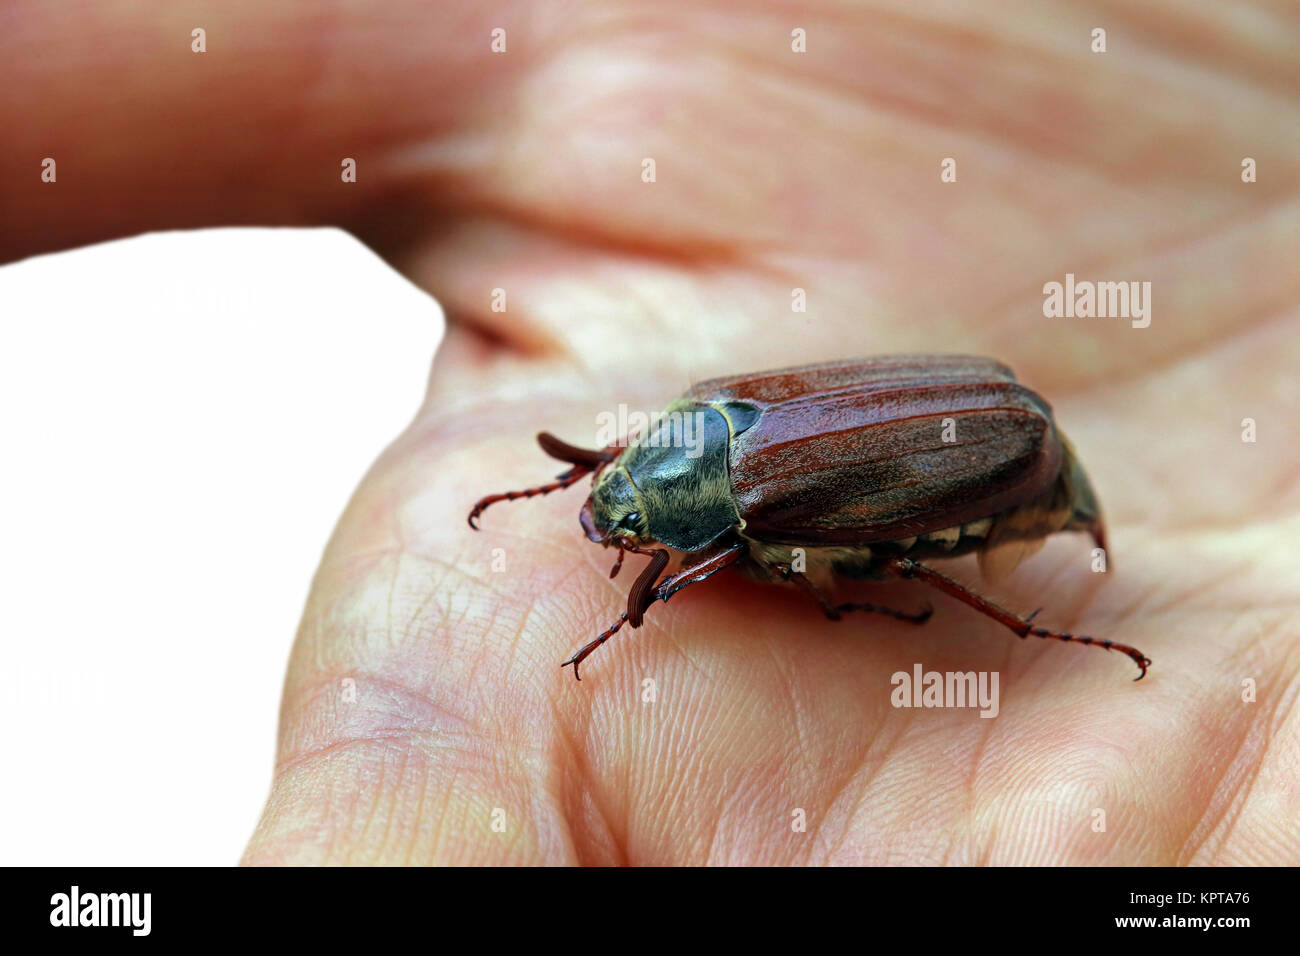 cockchafer on the hand Stock Photo